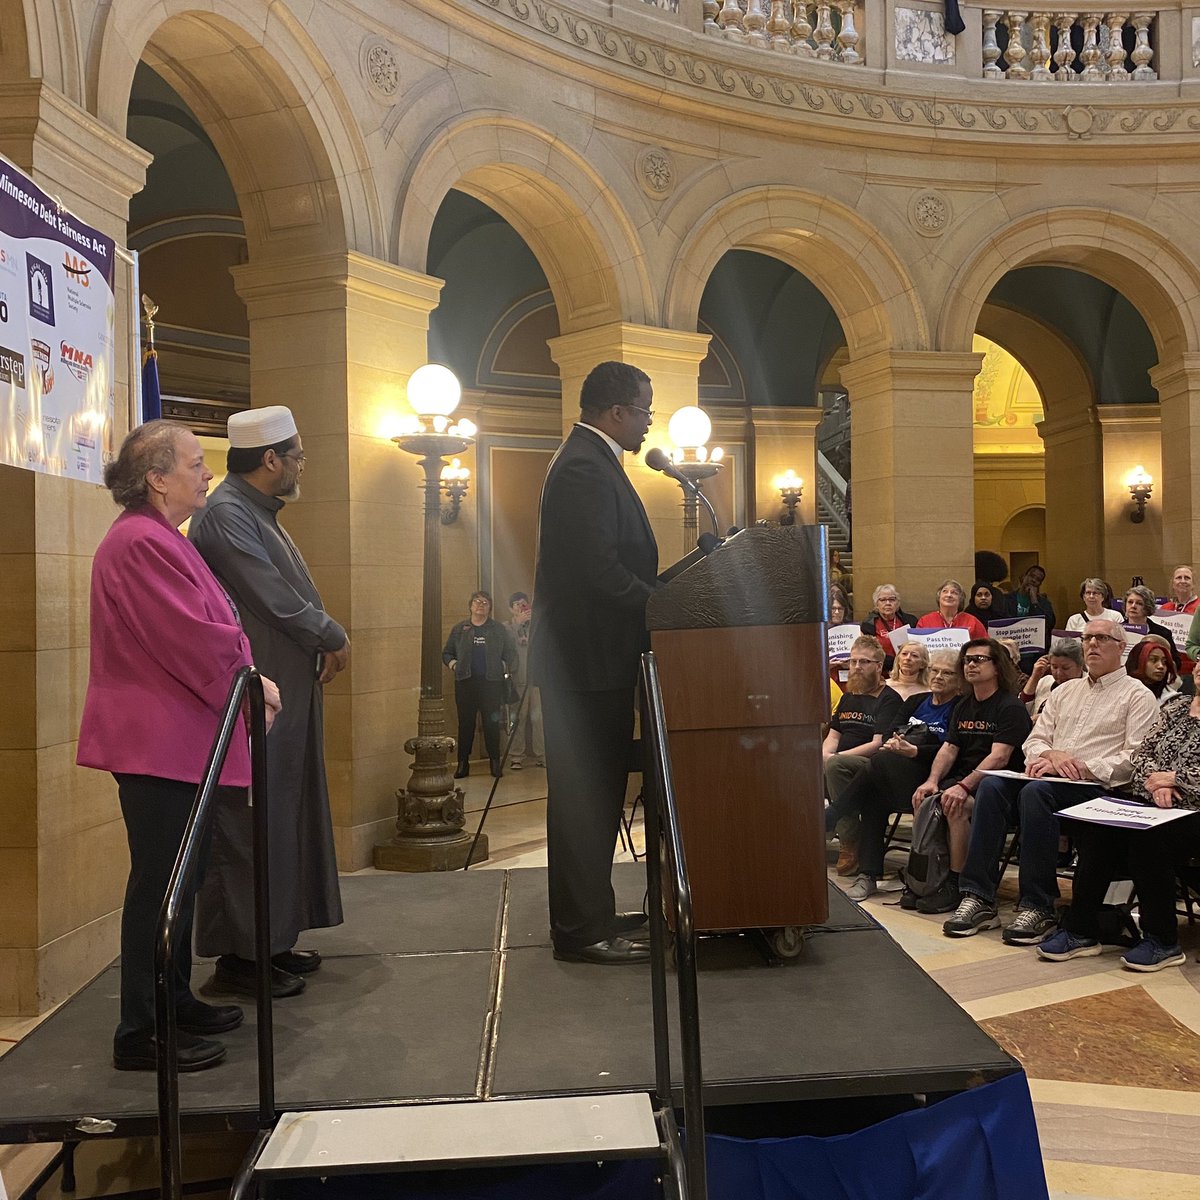 Reverend James Alberts, Board President of ISAIAH: “Mercy and forgiveness is missing in our debt collection system. Here in Minnesota, we must pass debt relief now!” 👏 #MNDebtFairness